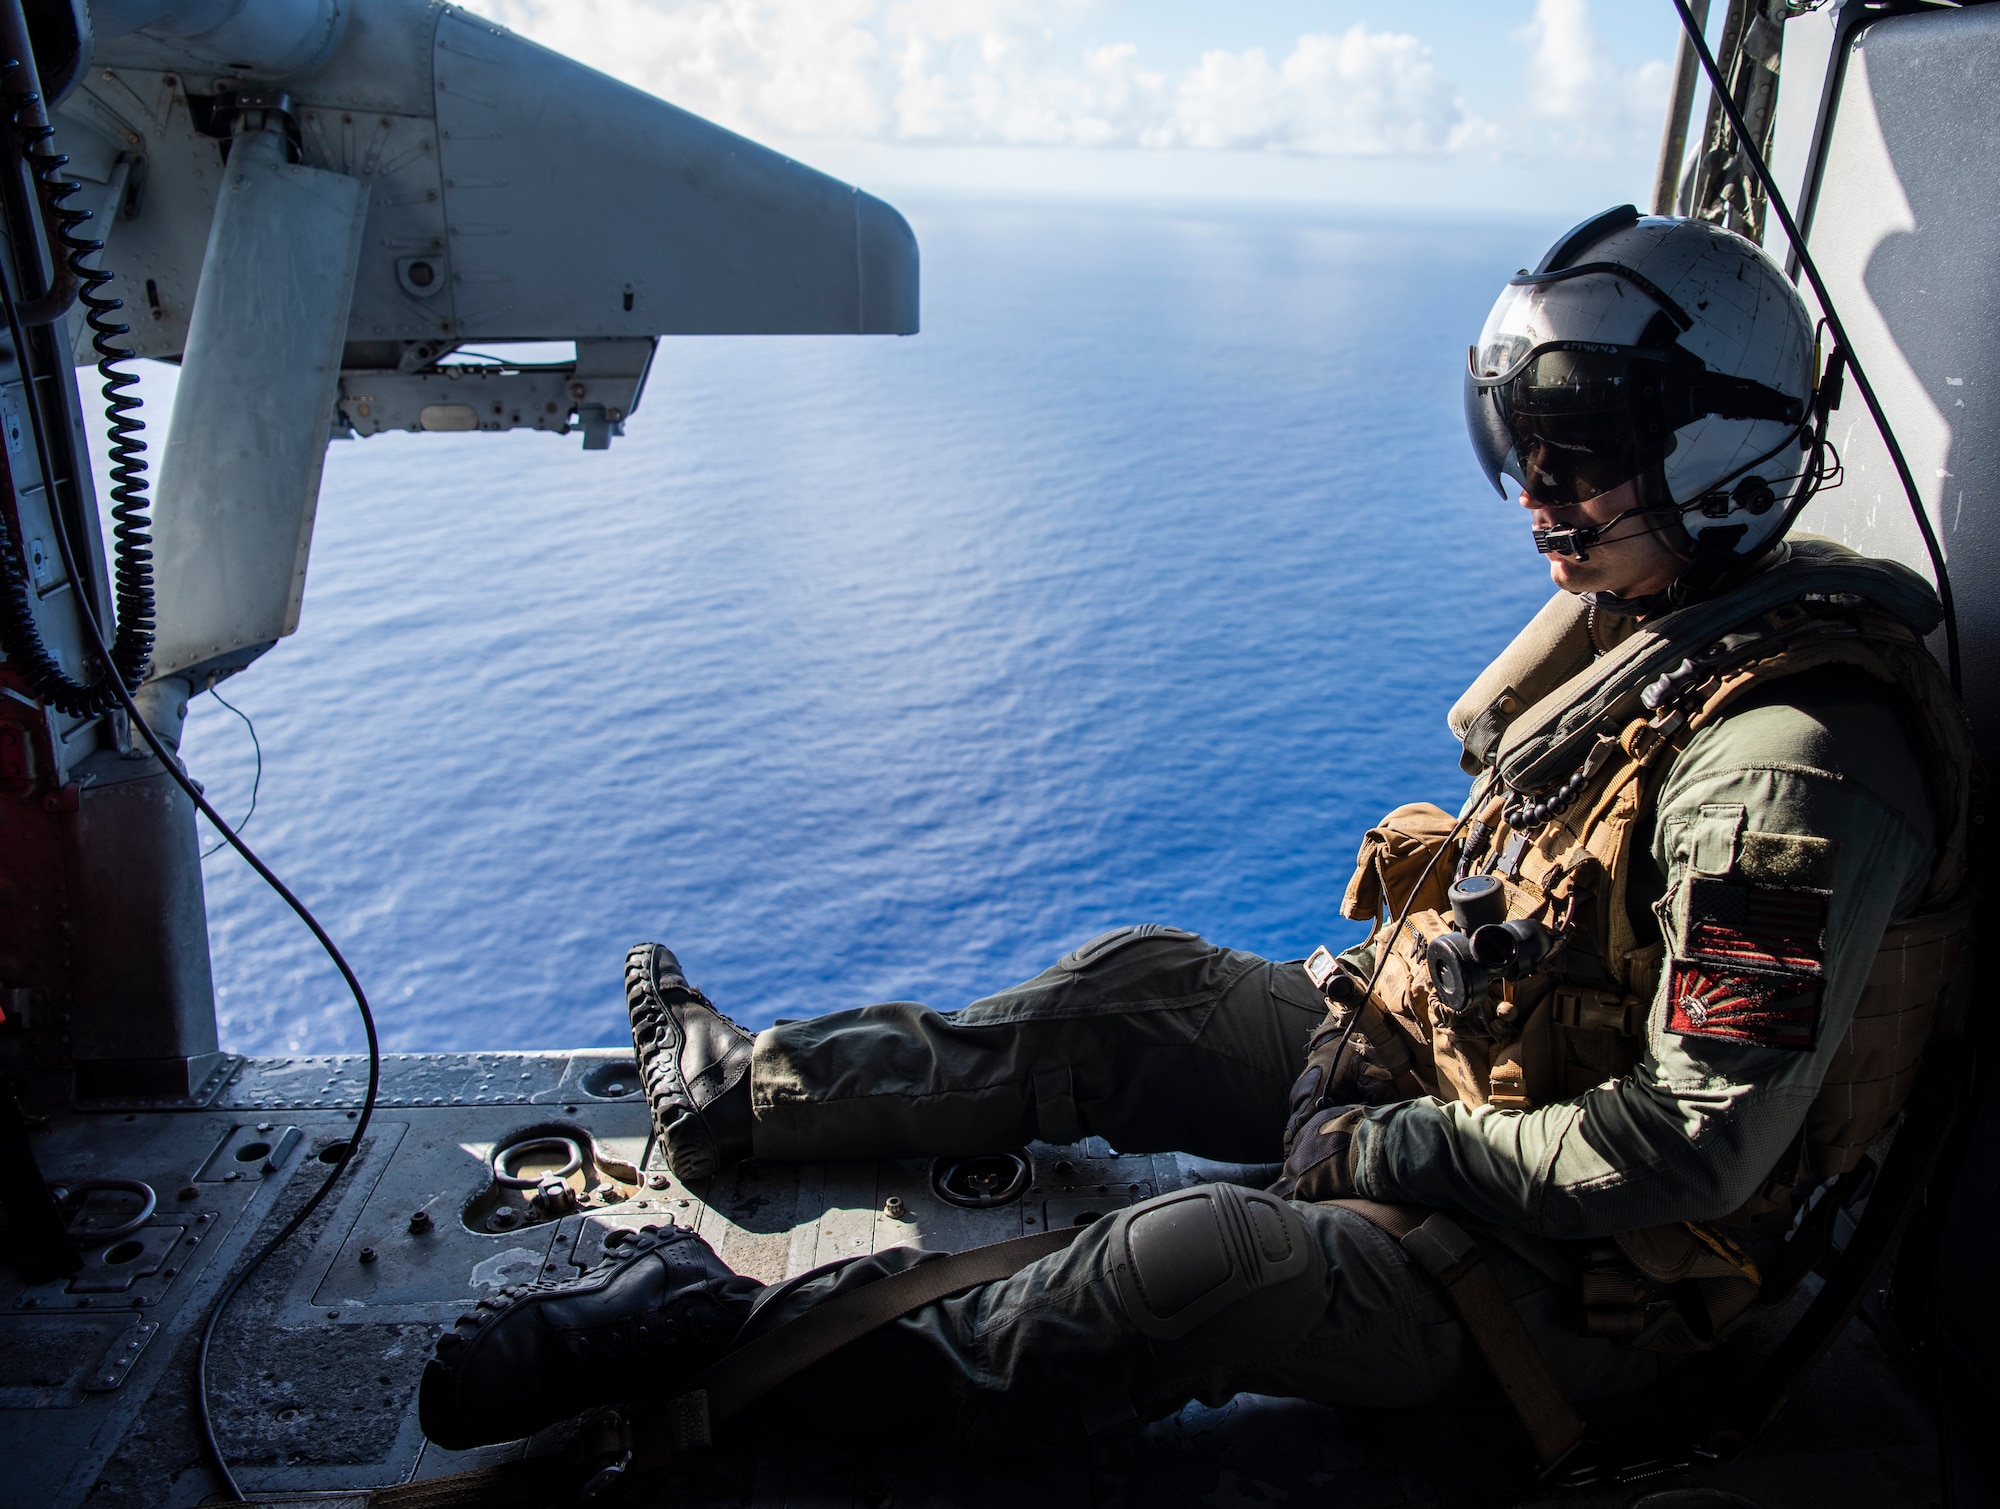 U.S. Navy Air Crewman 2nd Class Zach Morrissey, assigned to Helicopter Sea Combat Squadron 25, prepares to travel over Andersen Air Force Base, Guam, during an “Elephant Walk” in an MH-60S Knighthawk over the Pacific Ocean, April 13, 2020.